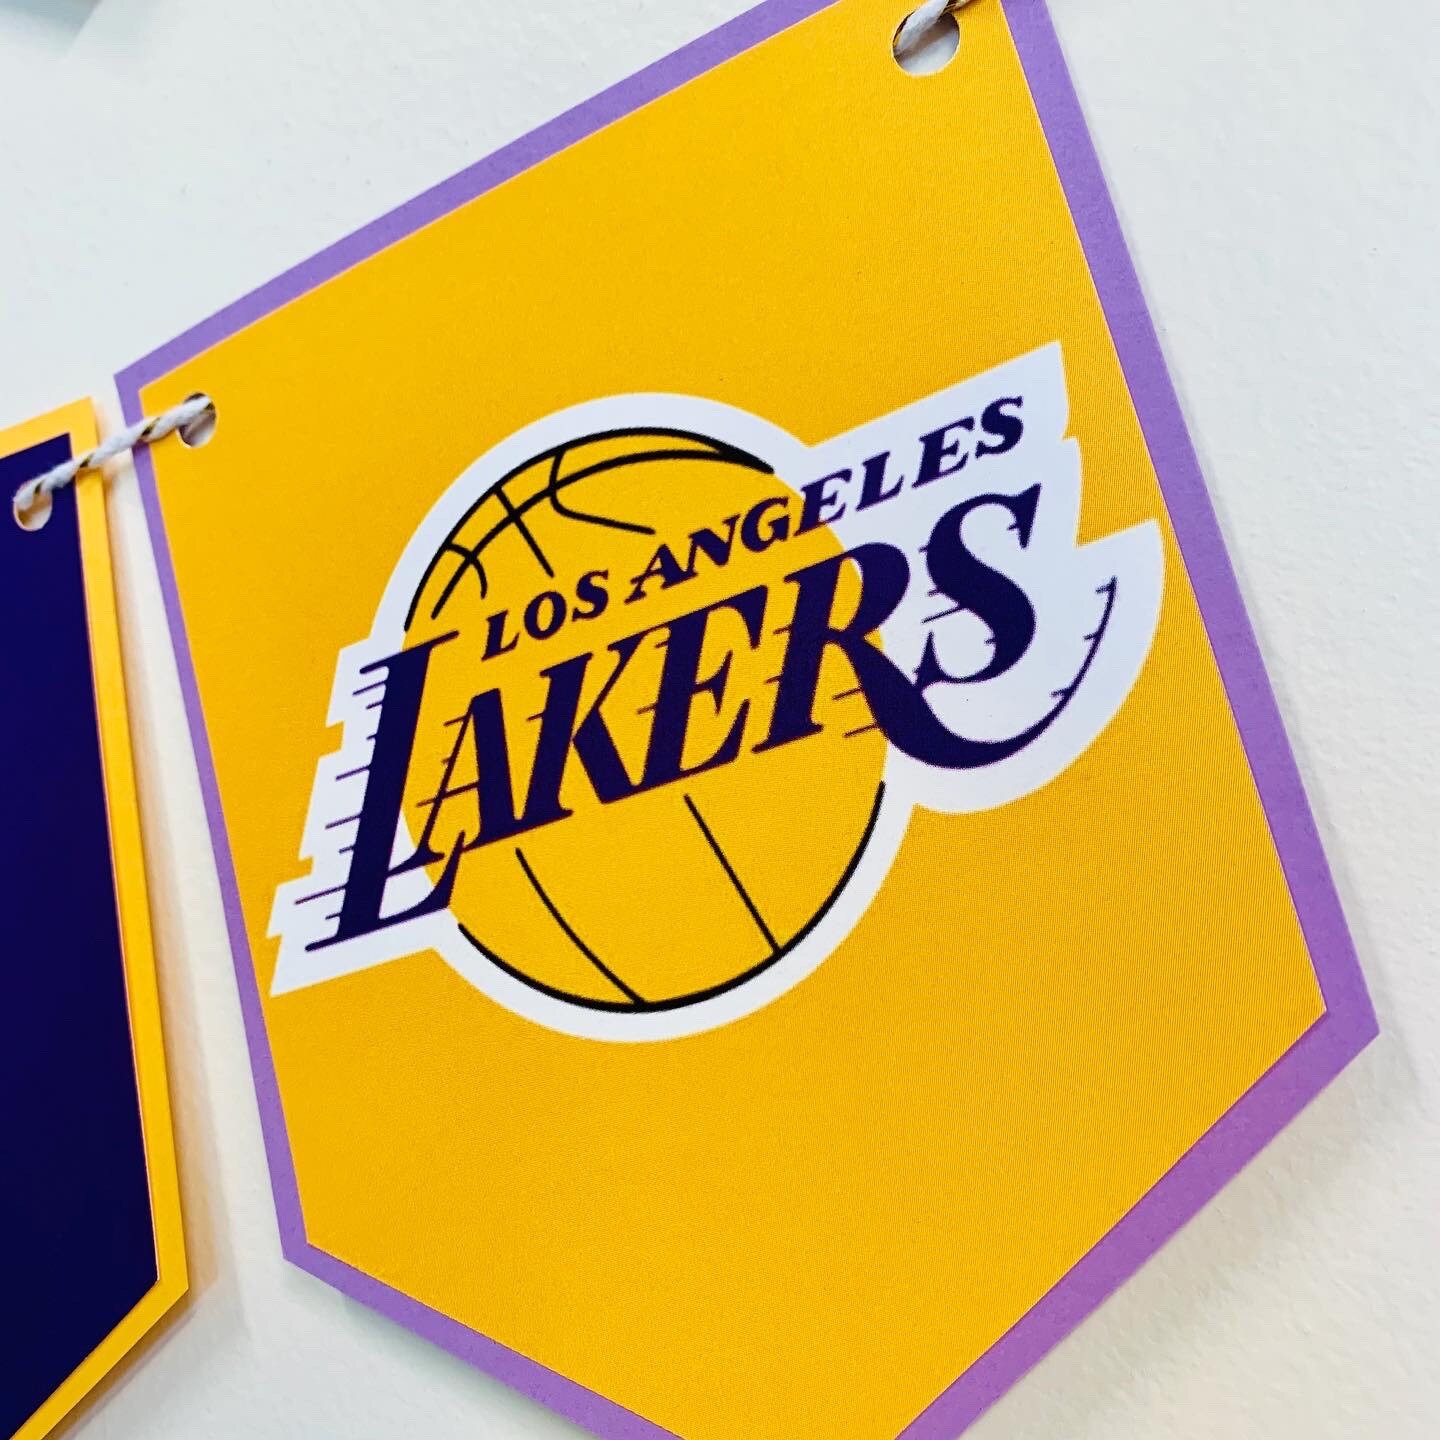 Los Angeles Lakers NBA Team Basketball Theme Birthday Party Banner